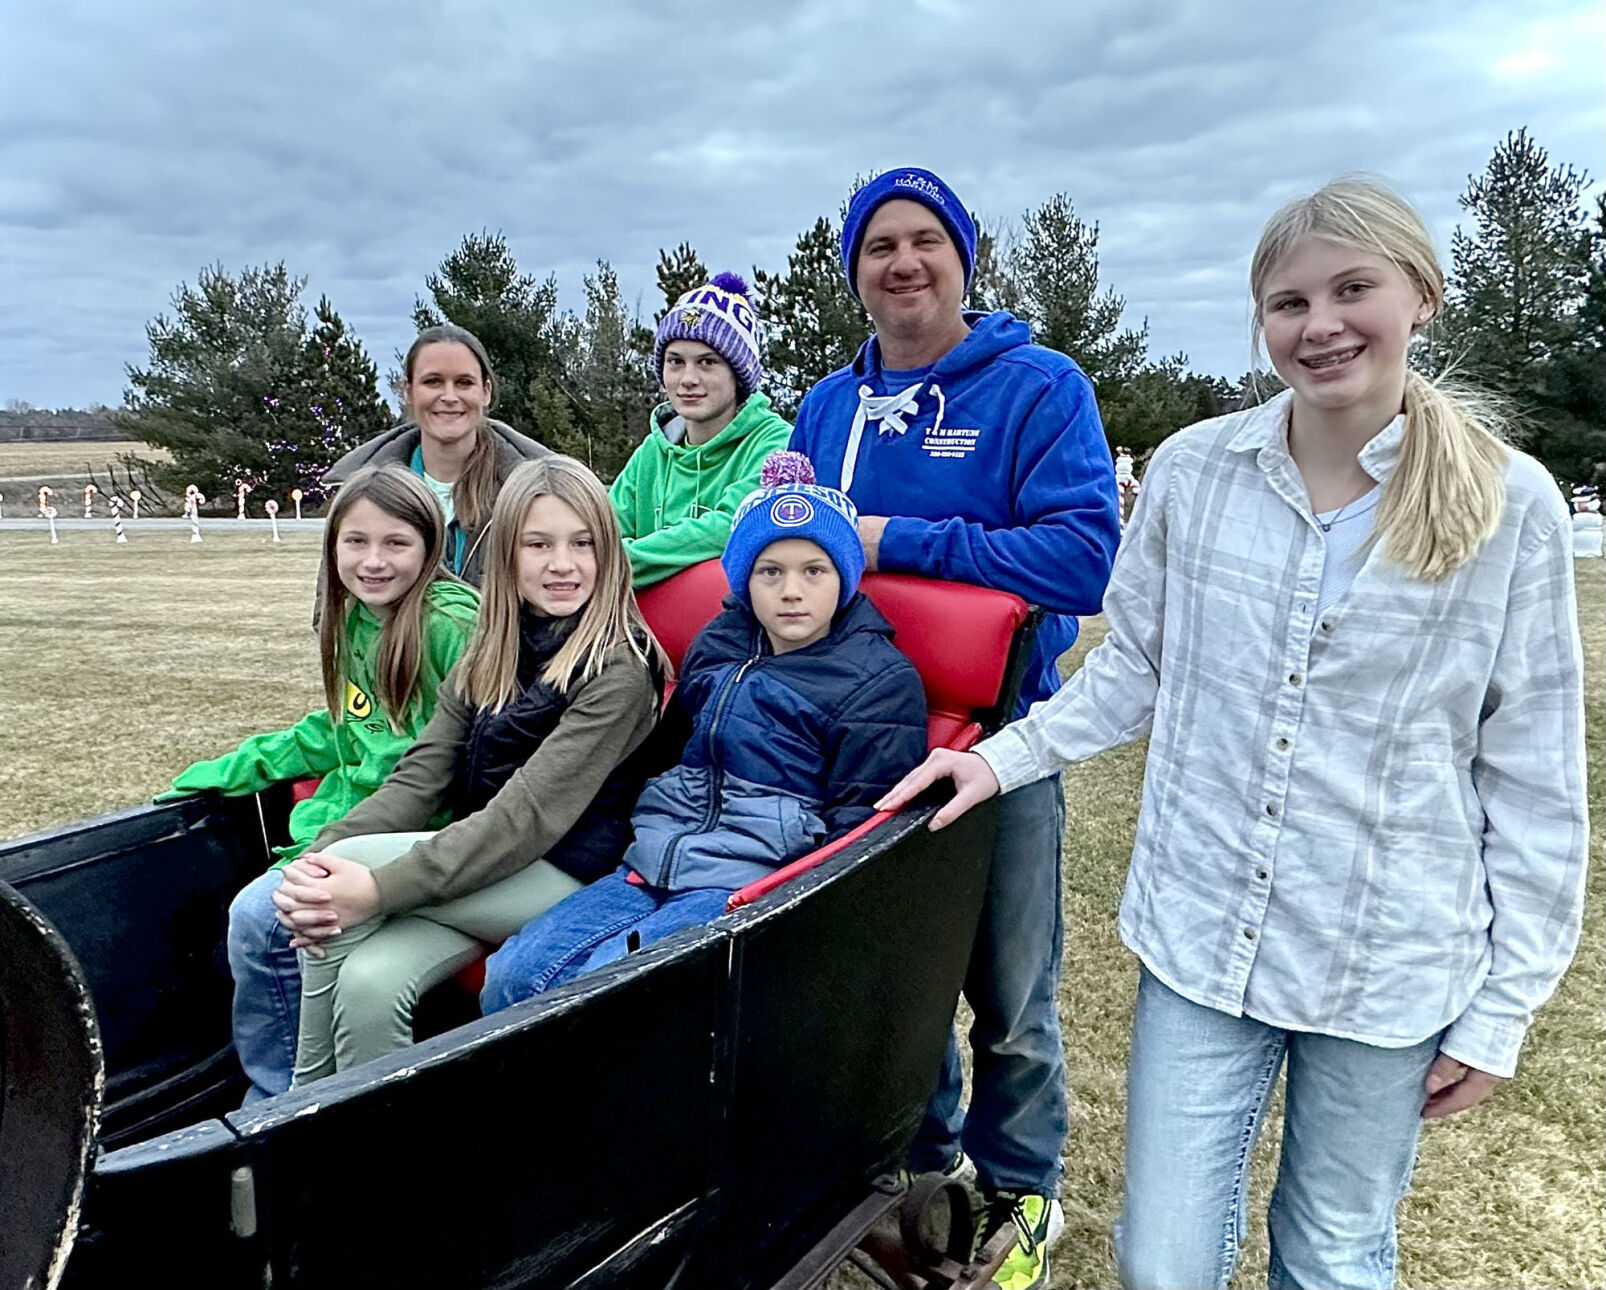 It's a holly jolly Christmas in Royalton | Morrison County Record